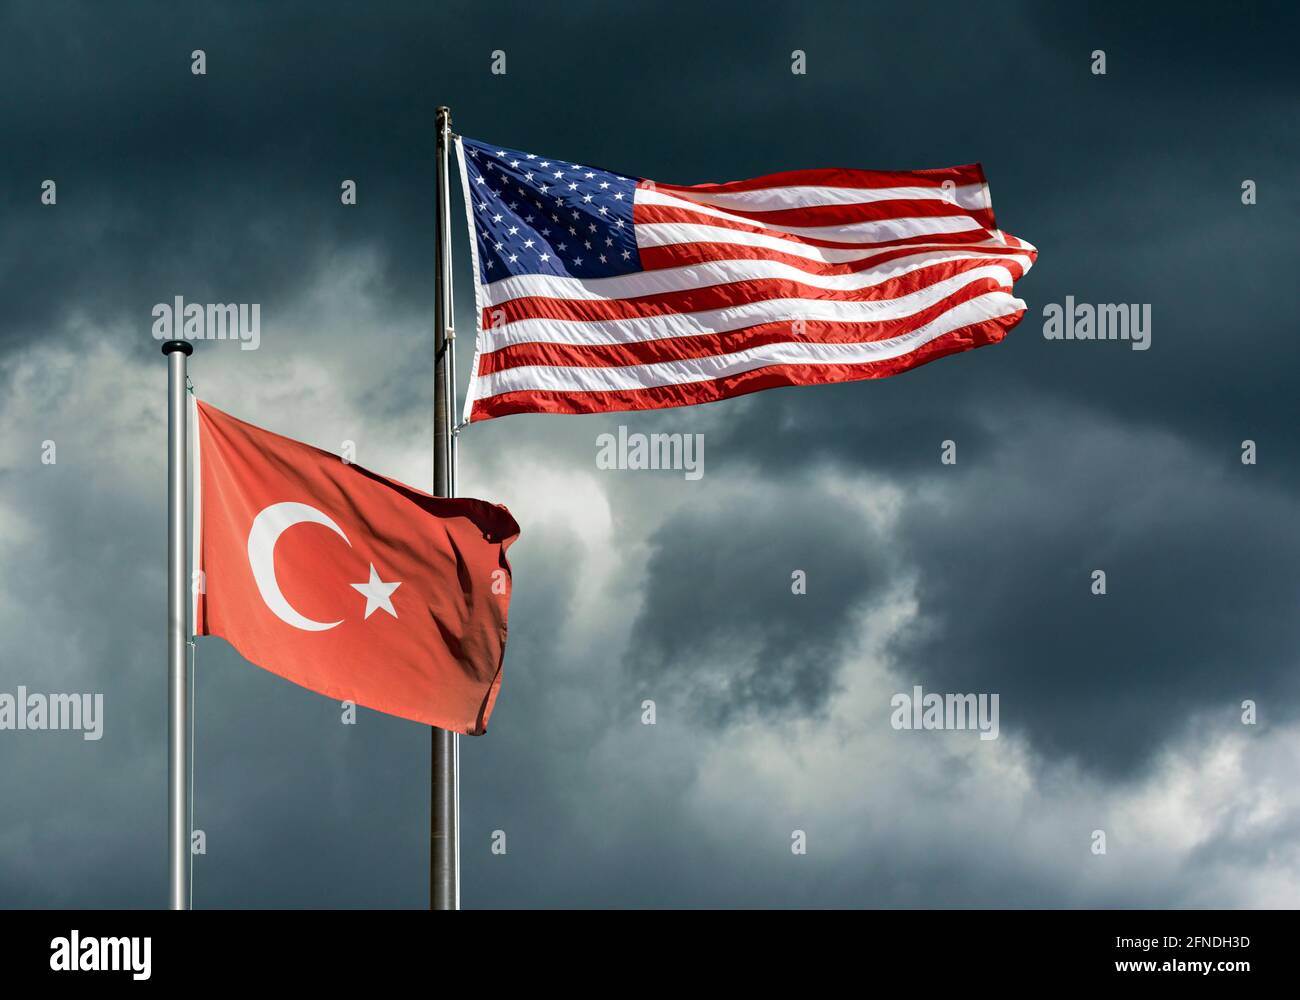 state flags of USA and Turkey fluttering in front of a dark, stormy sky, symbolic image for difficult political relations between the USA and Turkey Stock Photo